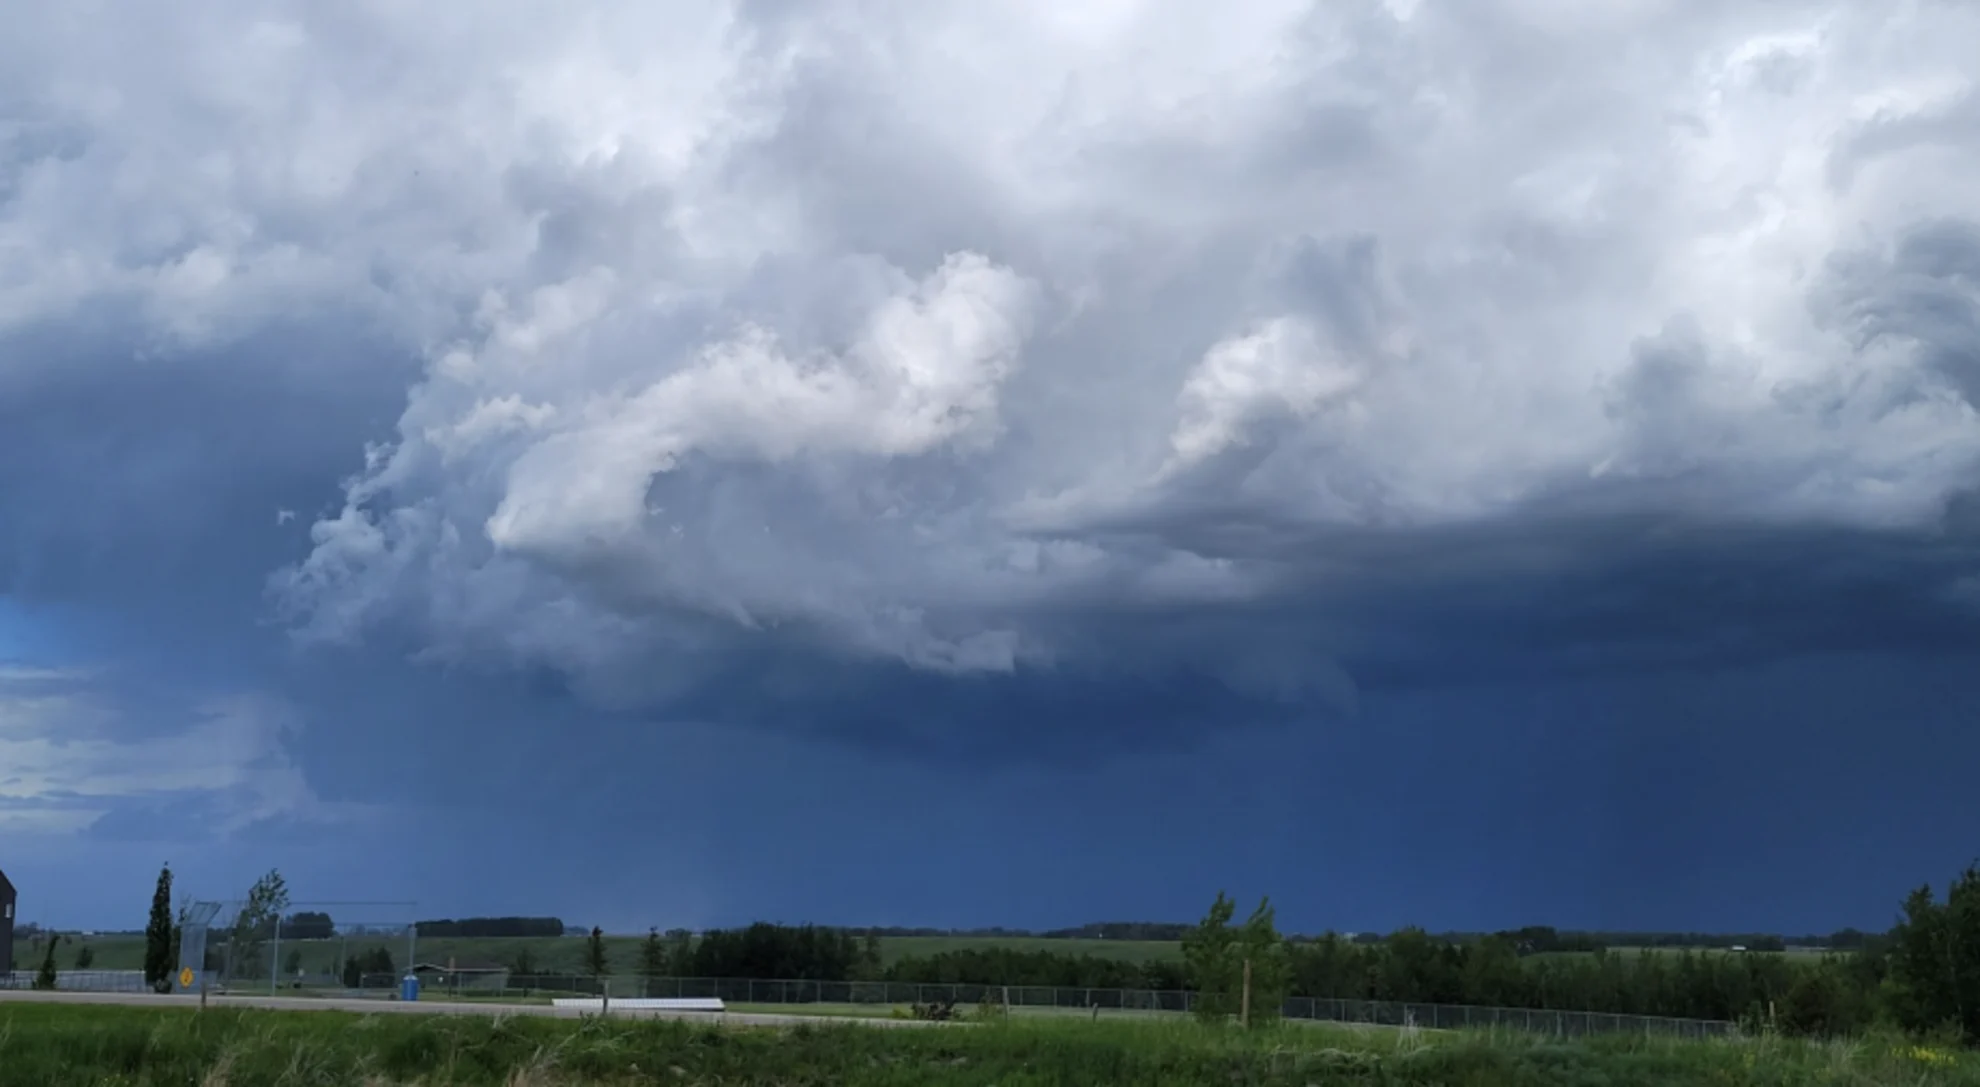 Parts of Saskatchewan will face another day of severe storm potential on Wednesday, with large hail as one of the threats. Details, here